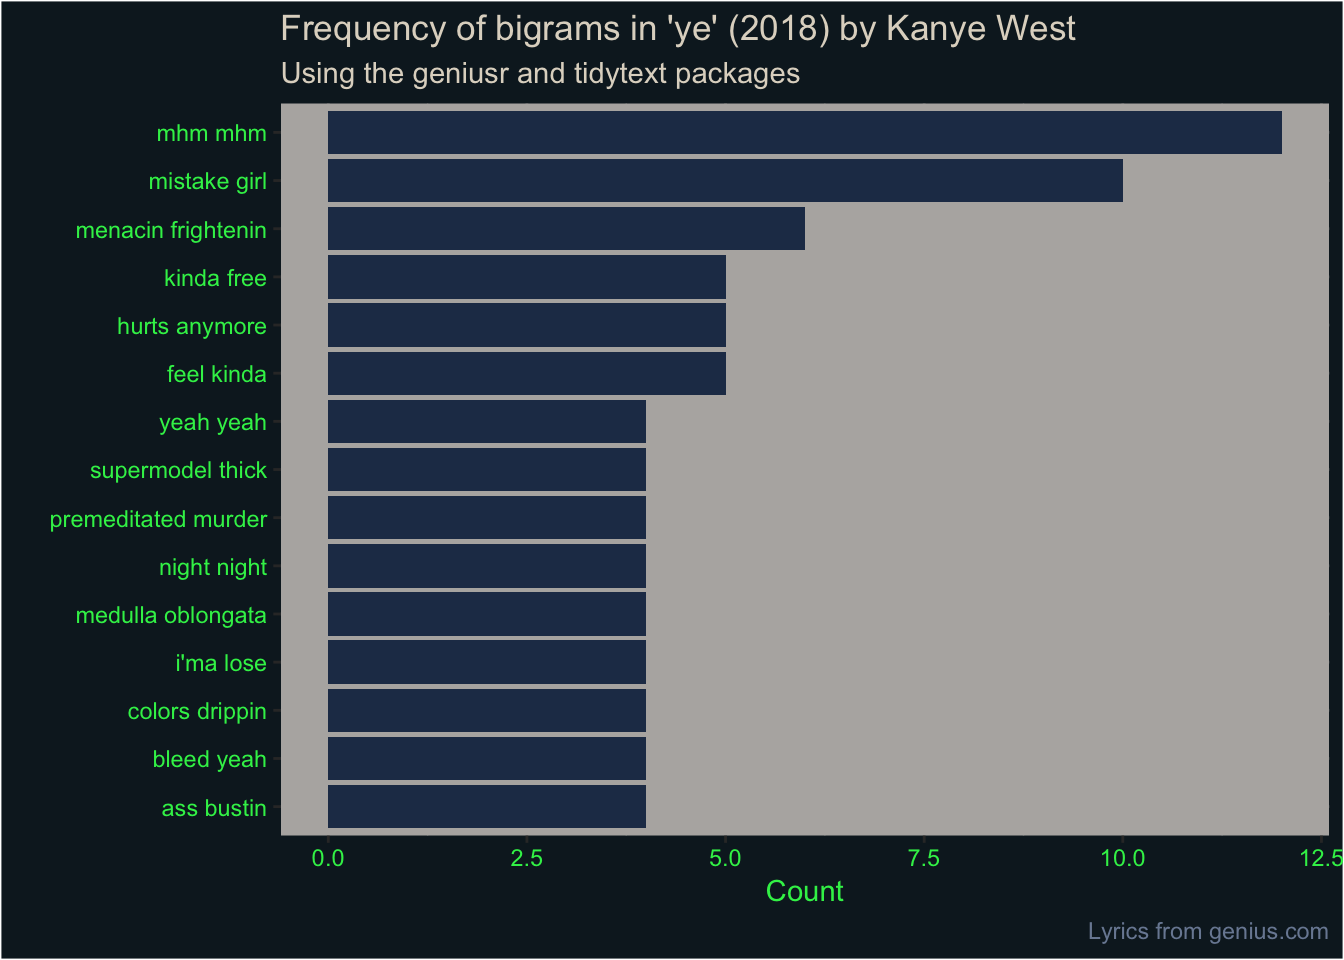 Bar plot of bigram frequency in Kanye West's 'ye' EP. The most frequent terms are 'mhm mhm', 'mistake girl' and 'menacin frigtenin' with 6 or more appearances.